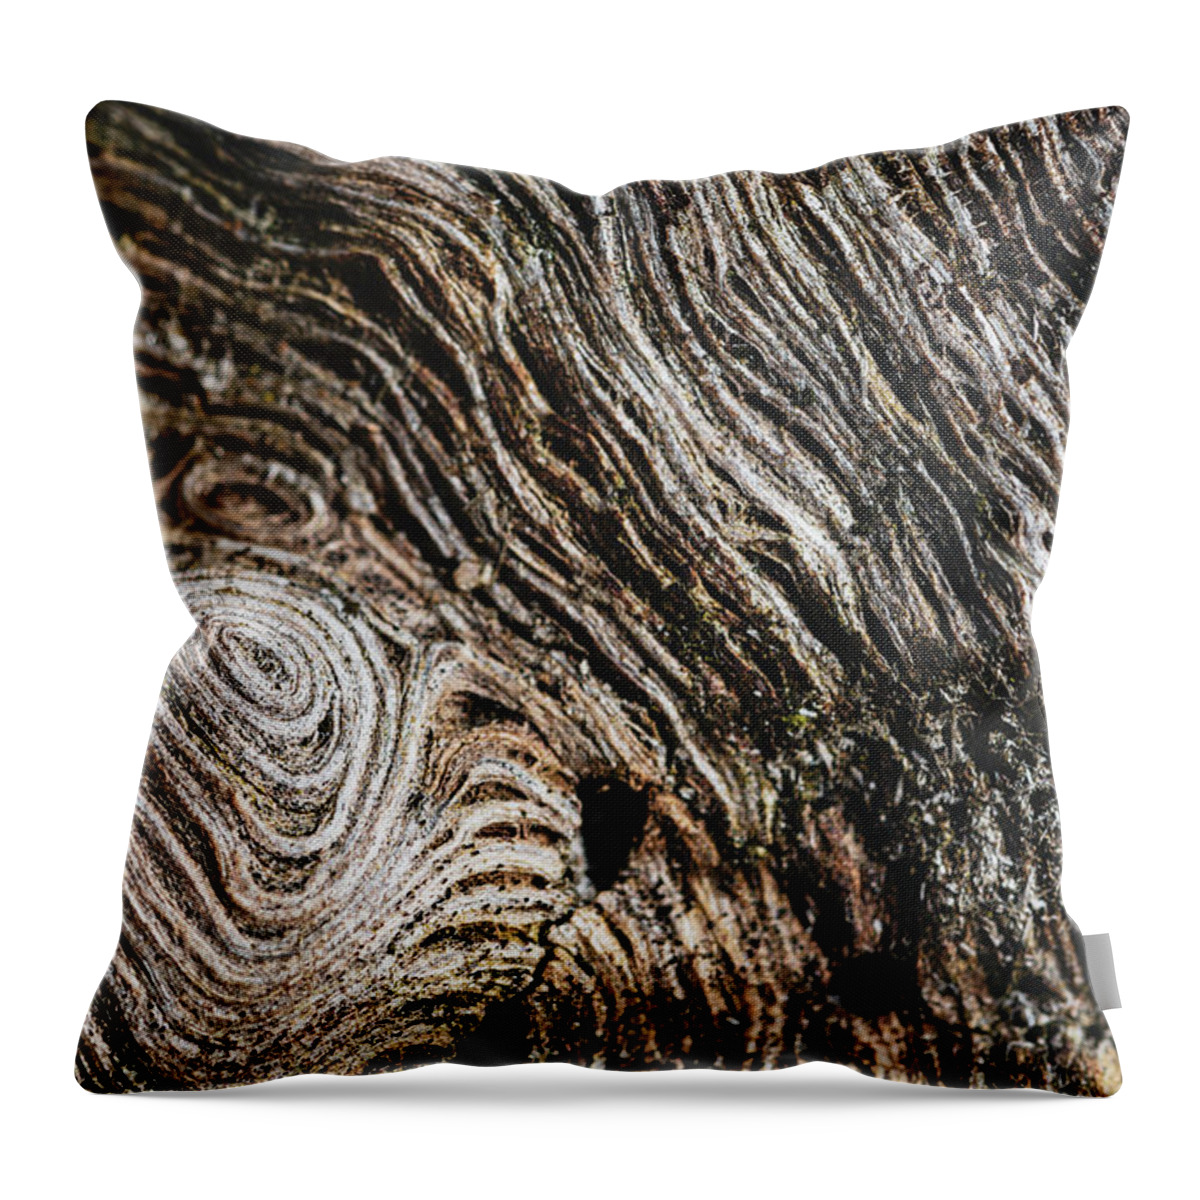 Wood Throw Pillow featuring the photograph Beautiful Wood Structure by Martin Vorel Minimalist Photography